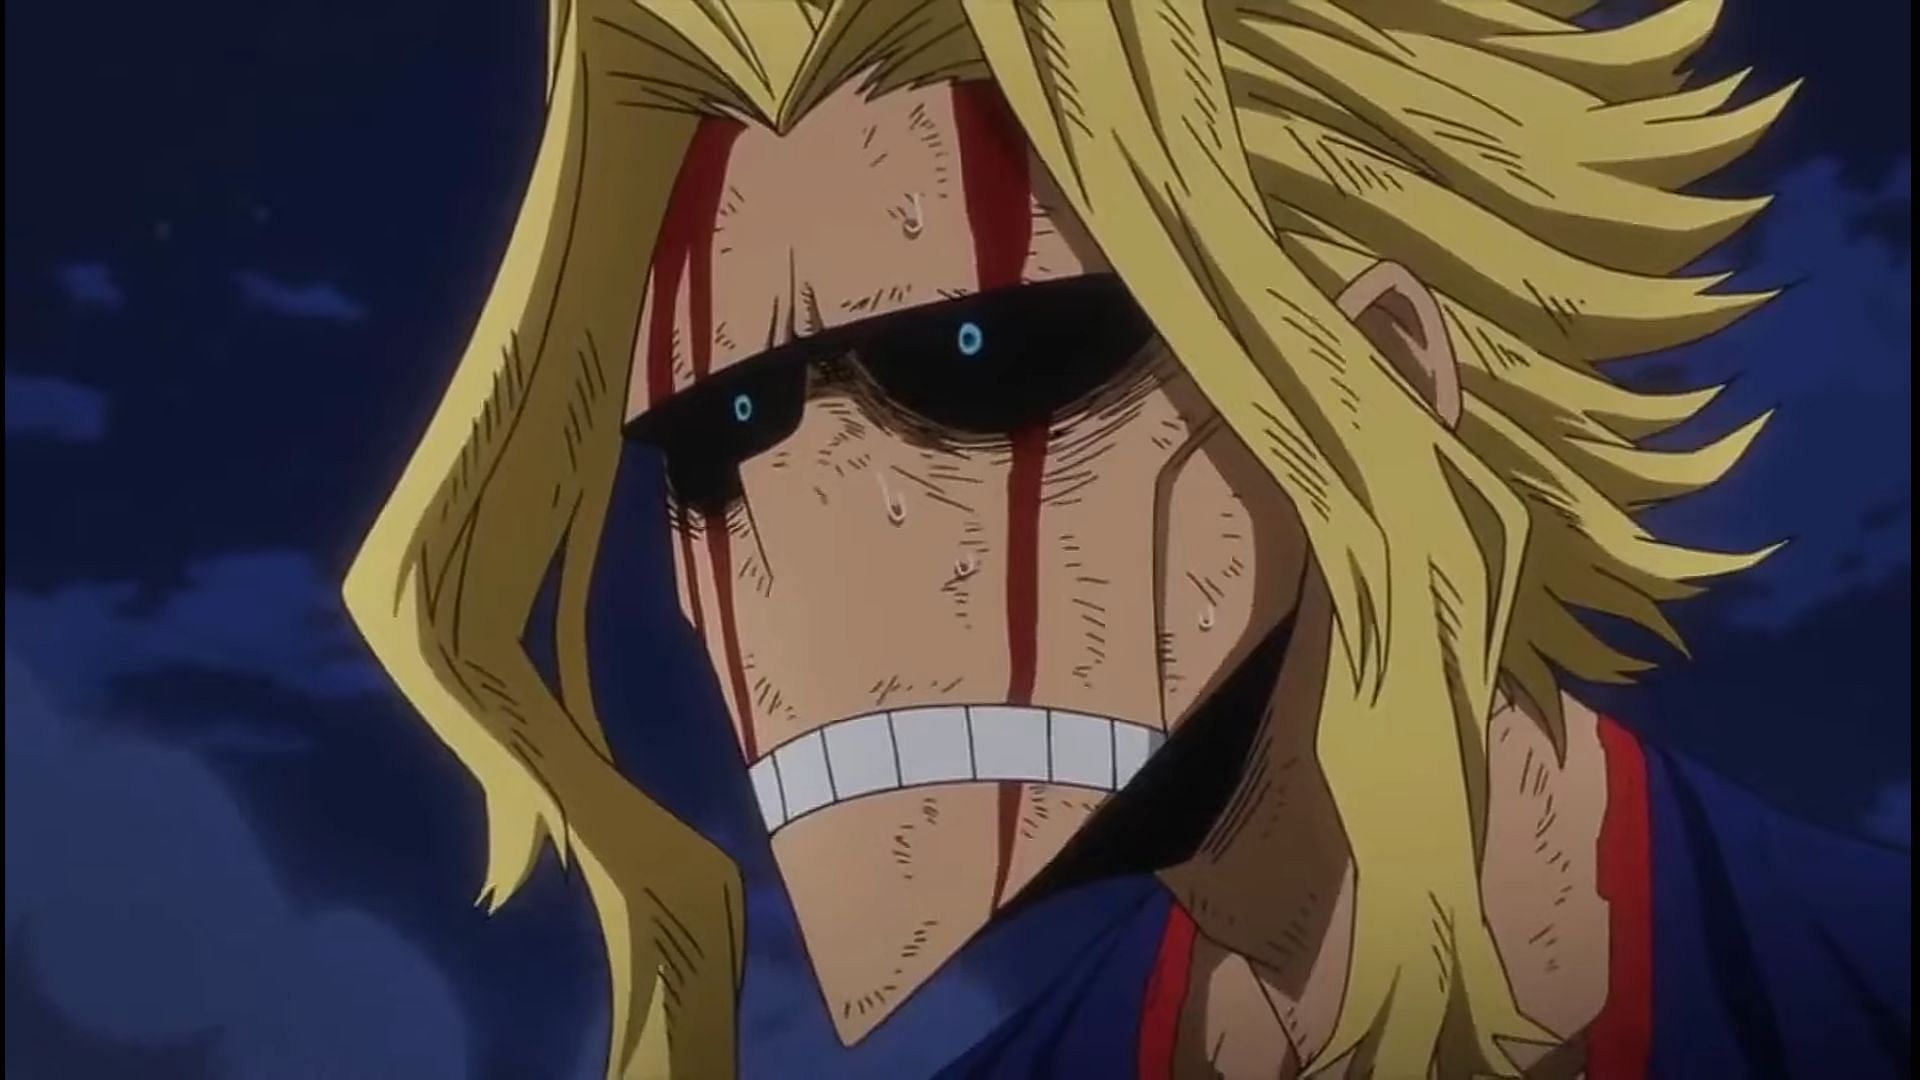 All Might as seen in the anime (Image via Studio Bones)